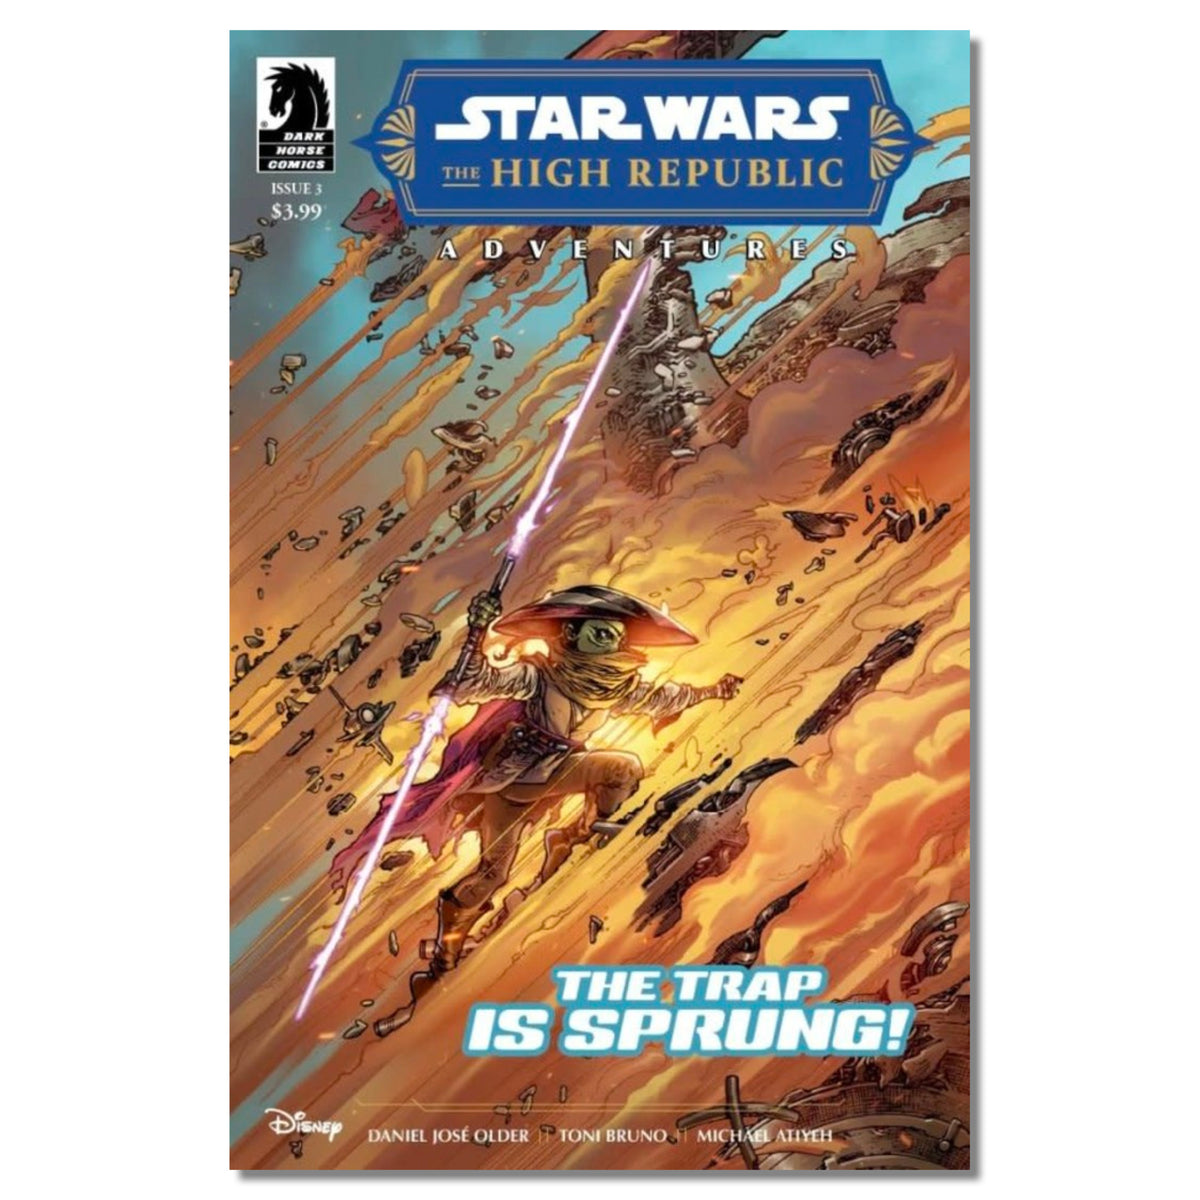 Star Wars The High Republic Adventures #3 (of 8) - FINAL SALE